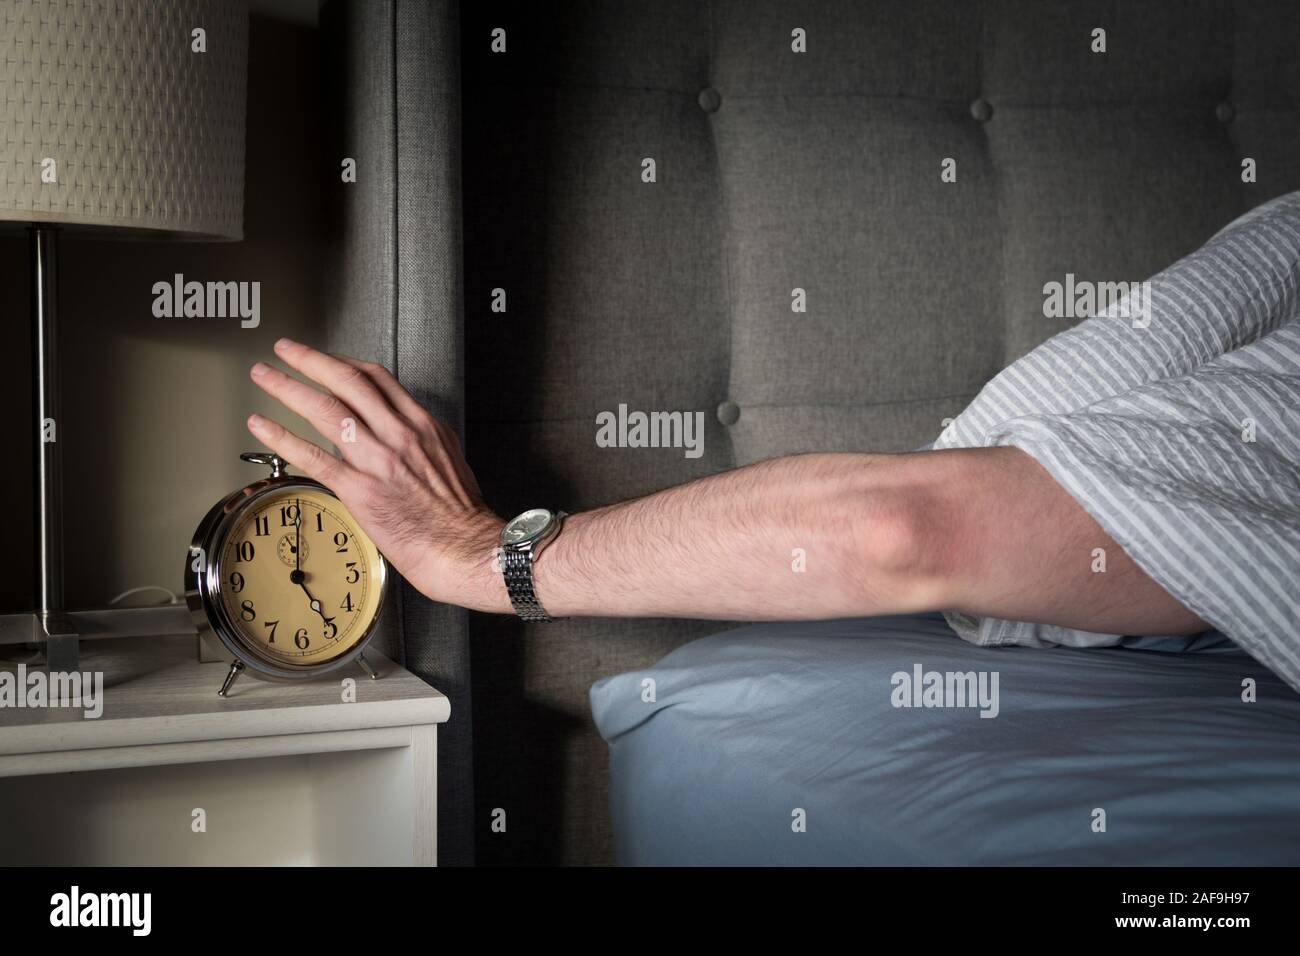 Arm reaching out from under blanket to silence an alarm clock. Stock Photo